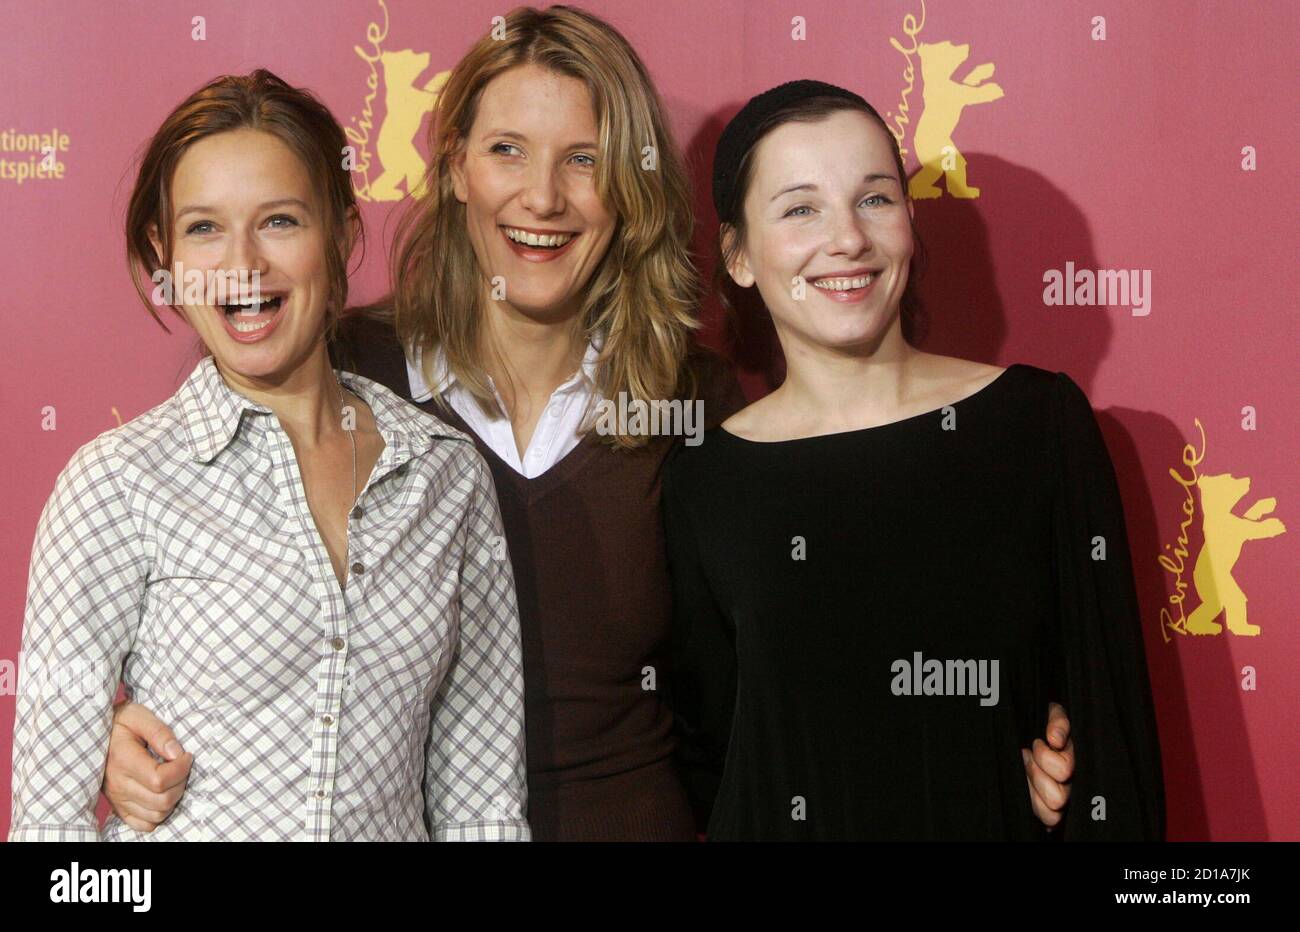 German director Vanessa Jopp (C) poses with German actresses Meret Becker (R) and Stefanie Stappenbeck during a photocall to present their film 'Komm Naeher' ('Happy as One') running out of competition at the 56th Berlinale International Film Festival in Berlin February 16, 2006. The festival runs from February 9-19. Stock Photo